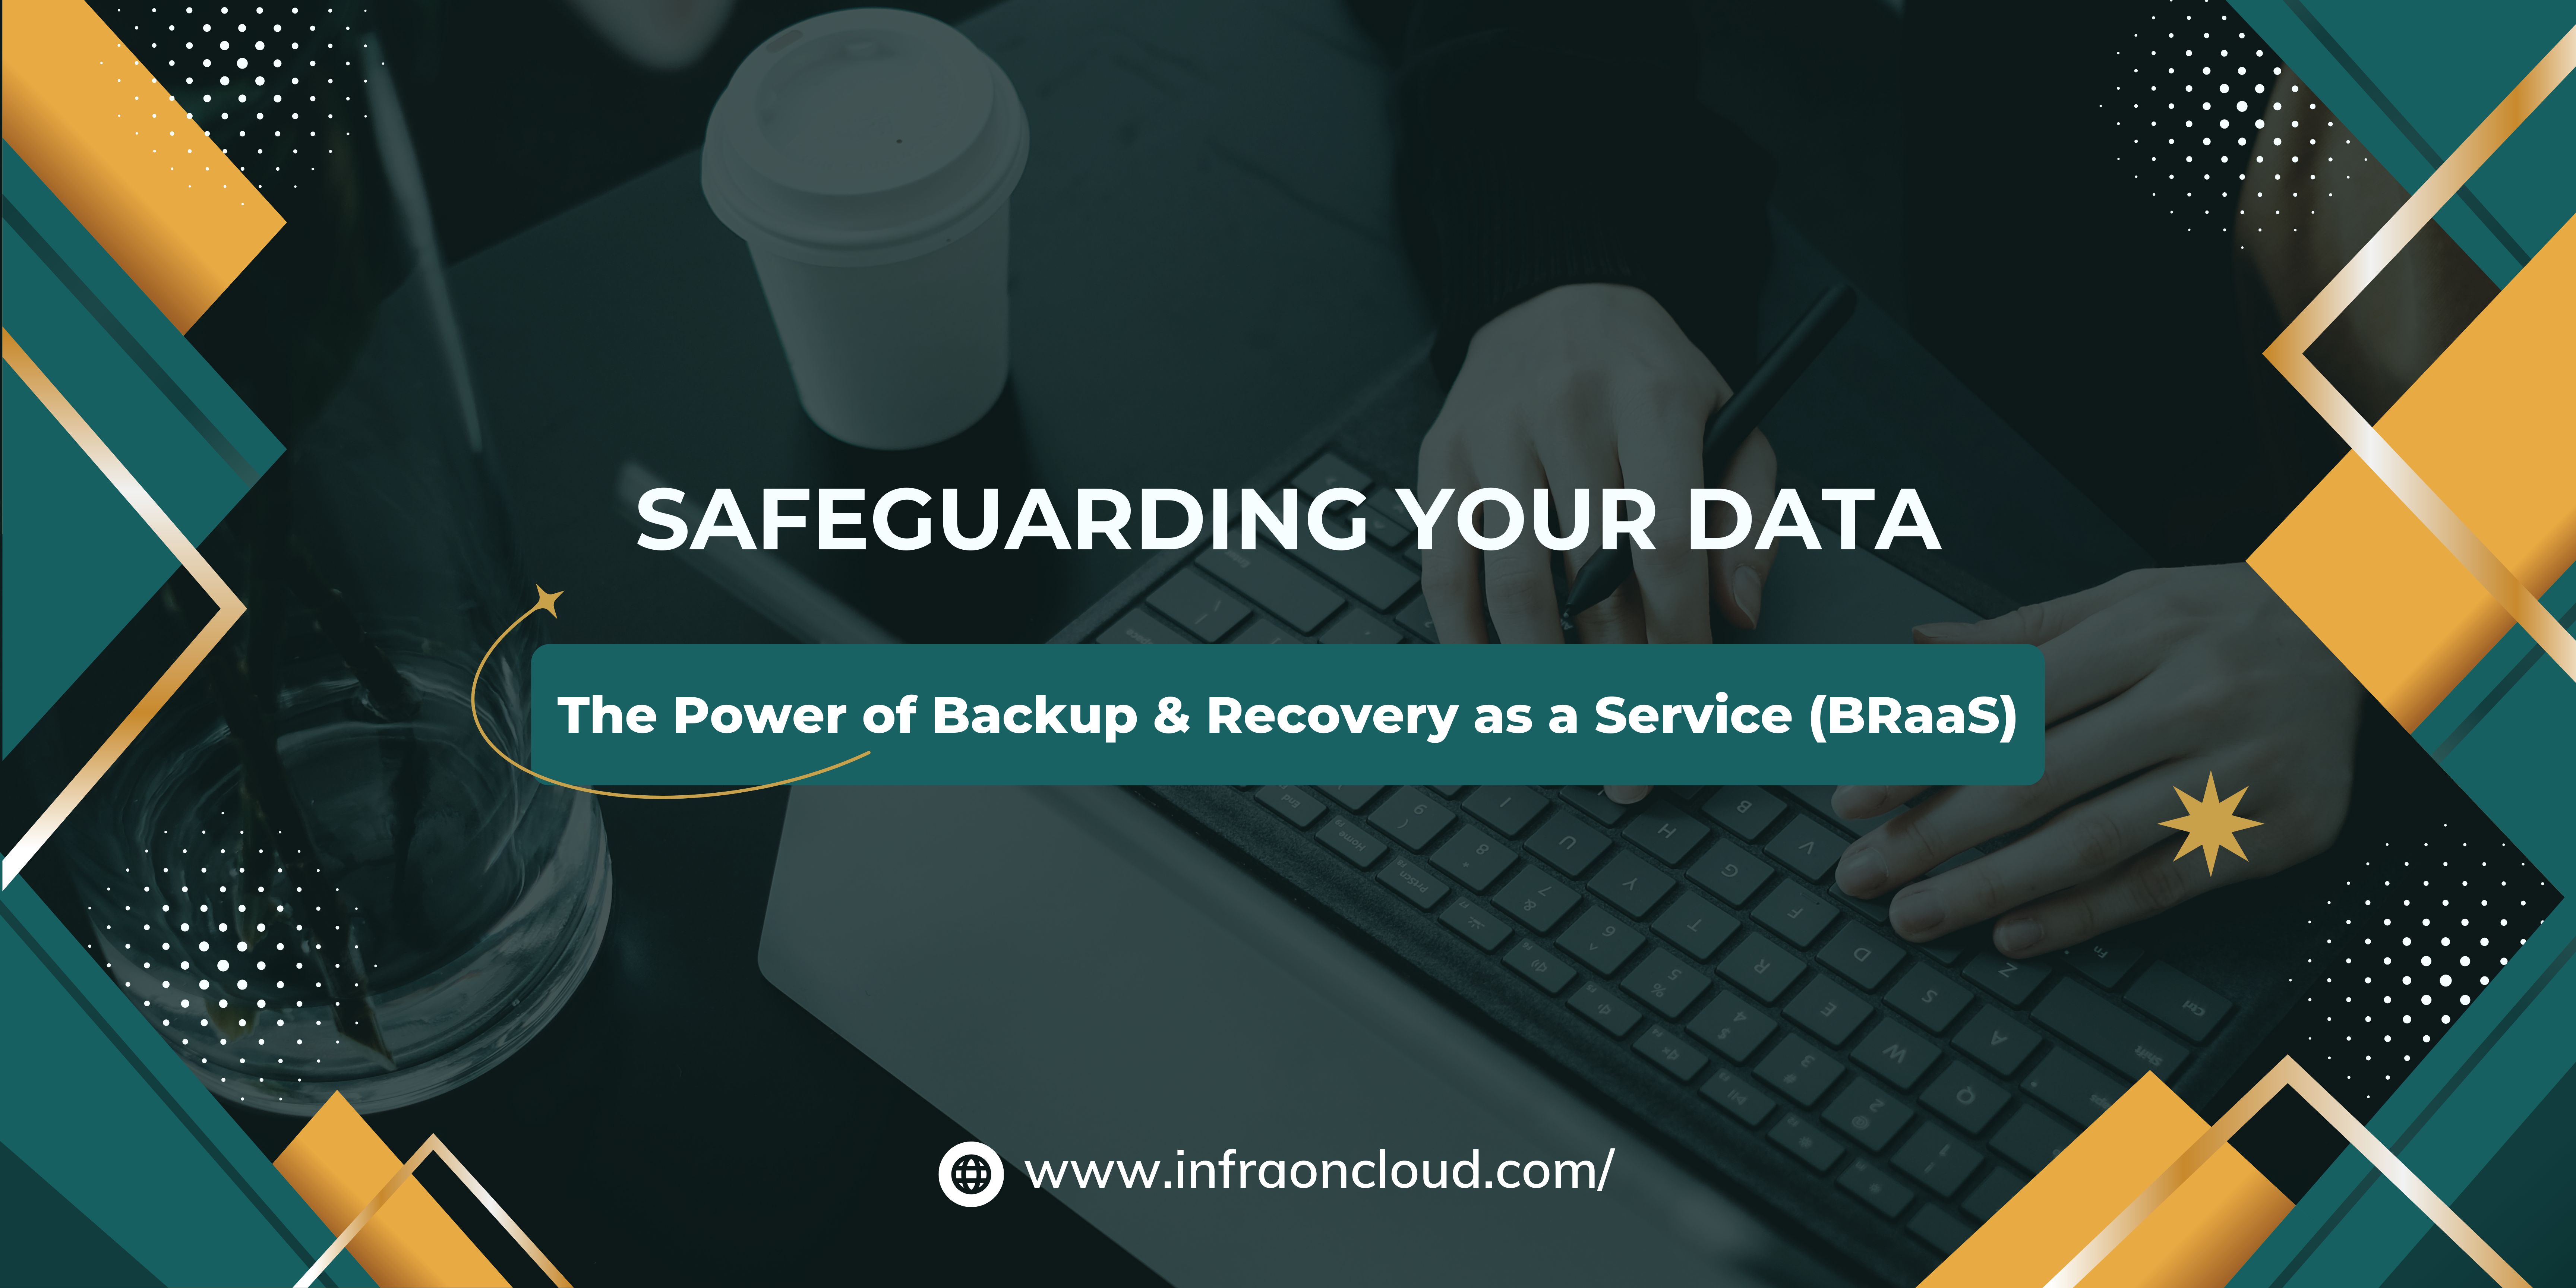 Backup & Recovery as a Service (BRaaS)